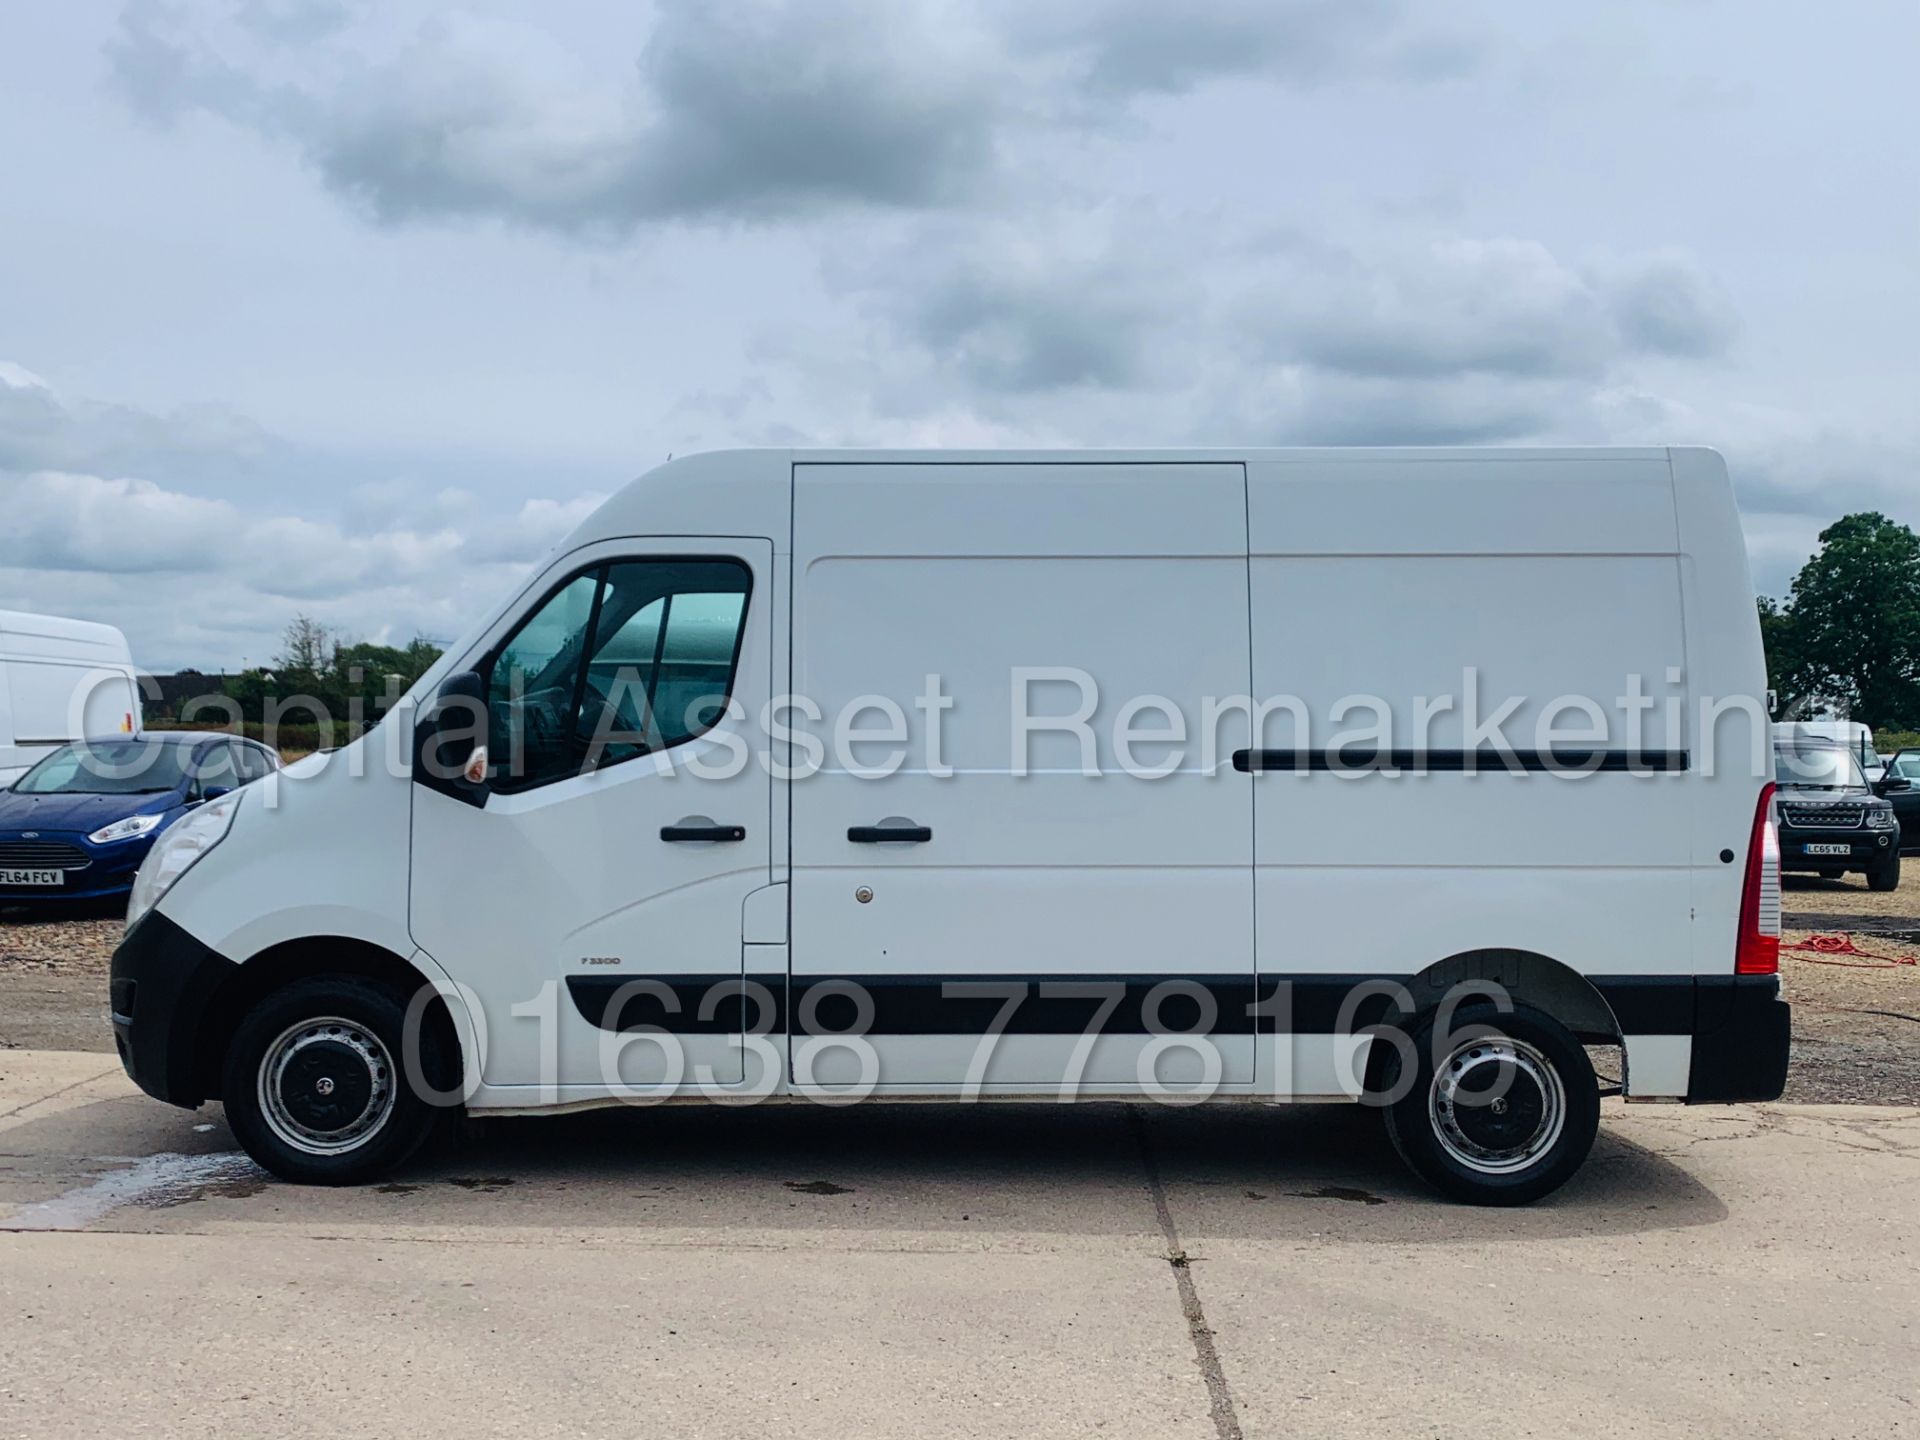 (ON SALE) VAUXHALL MOVANO *MWB HI-ROOF* (2018 - EURO 6) '2.3 CDTI - 130 BHP - 6 SPEED' (1 OWNER) - Image 8 of 39